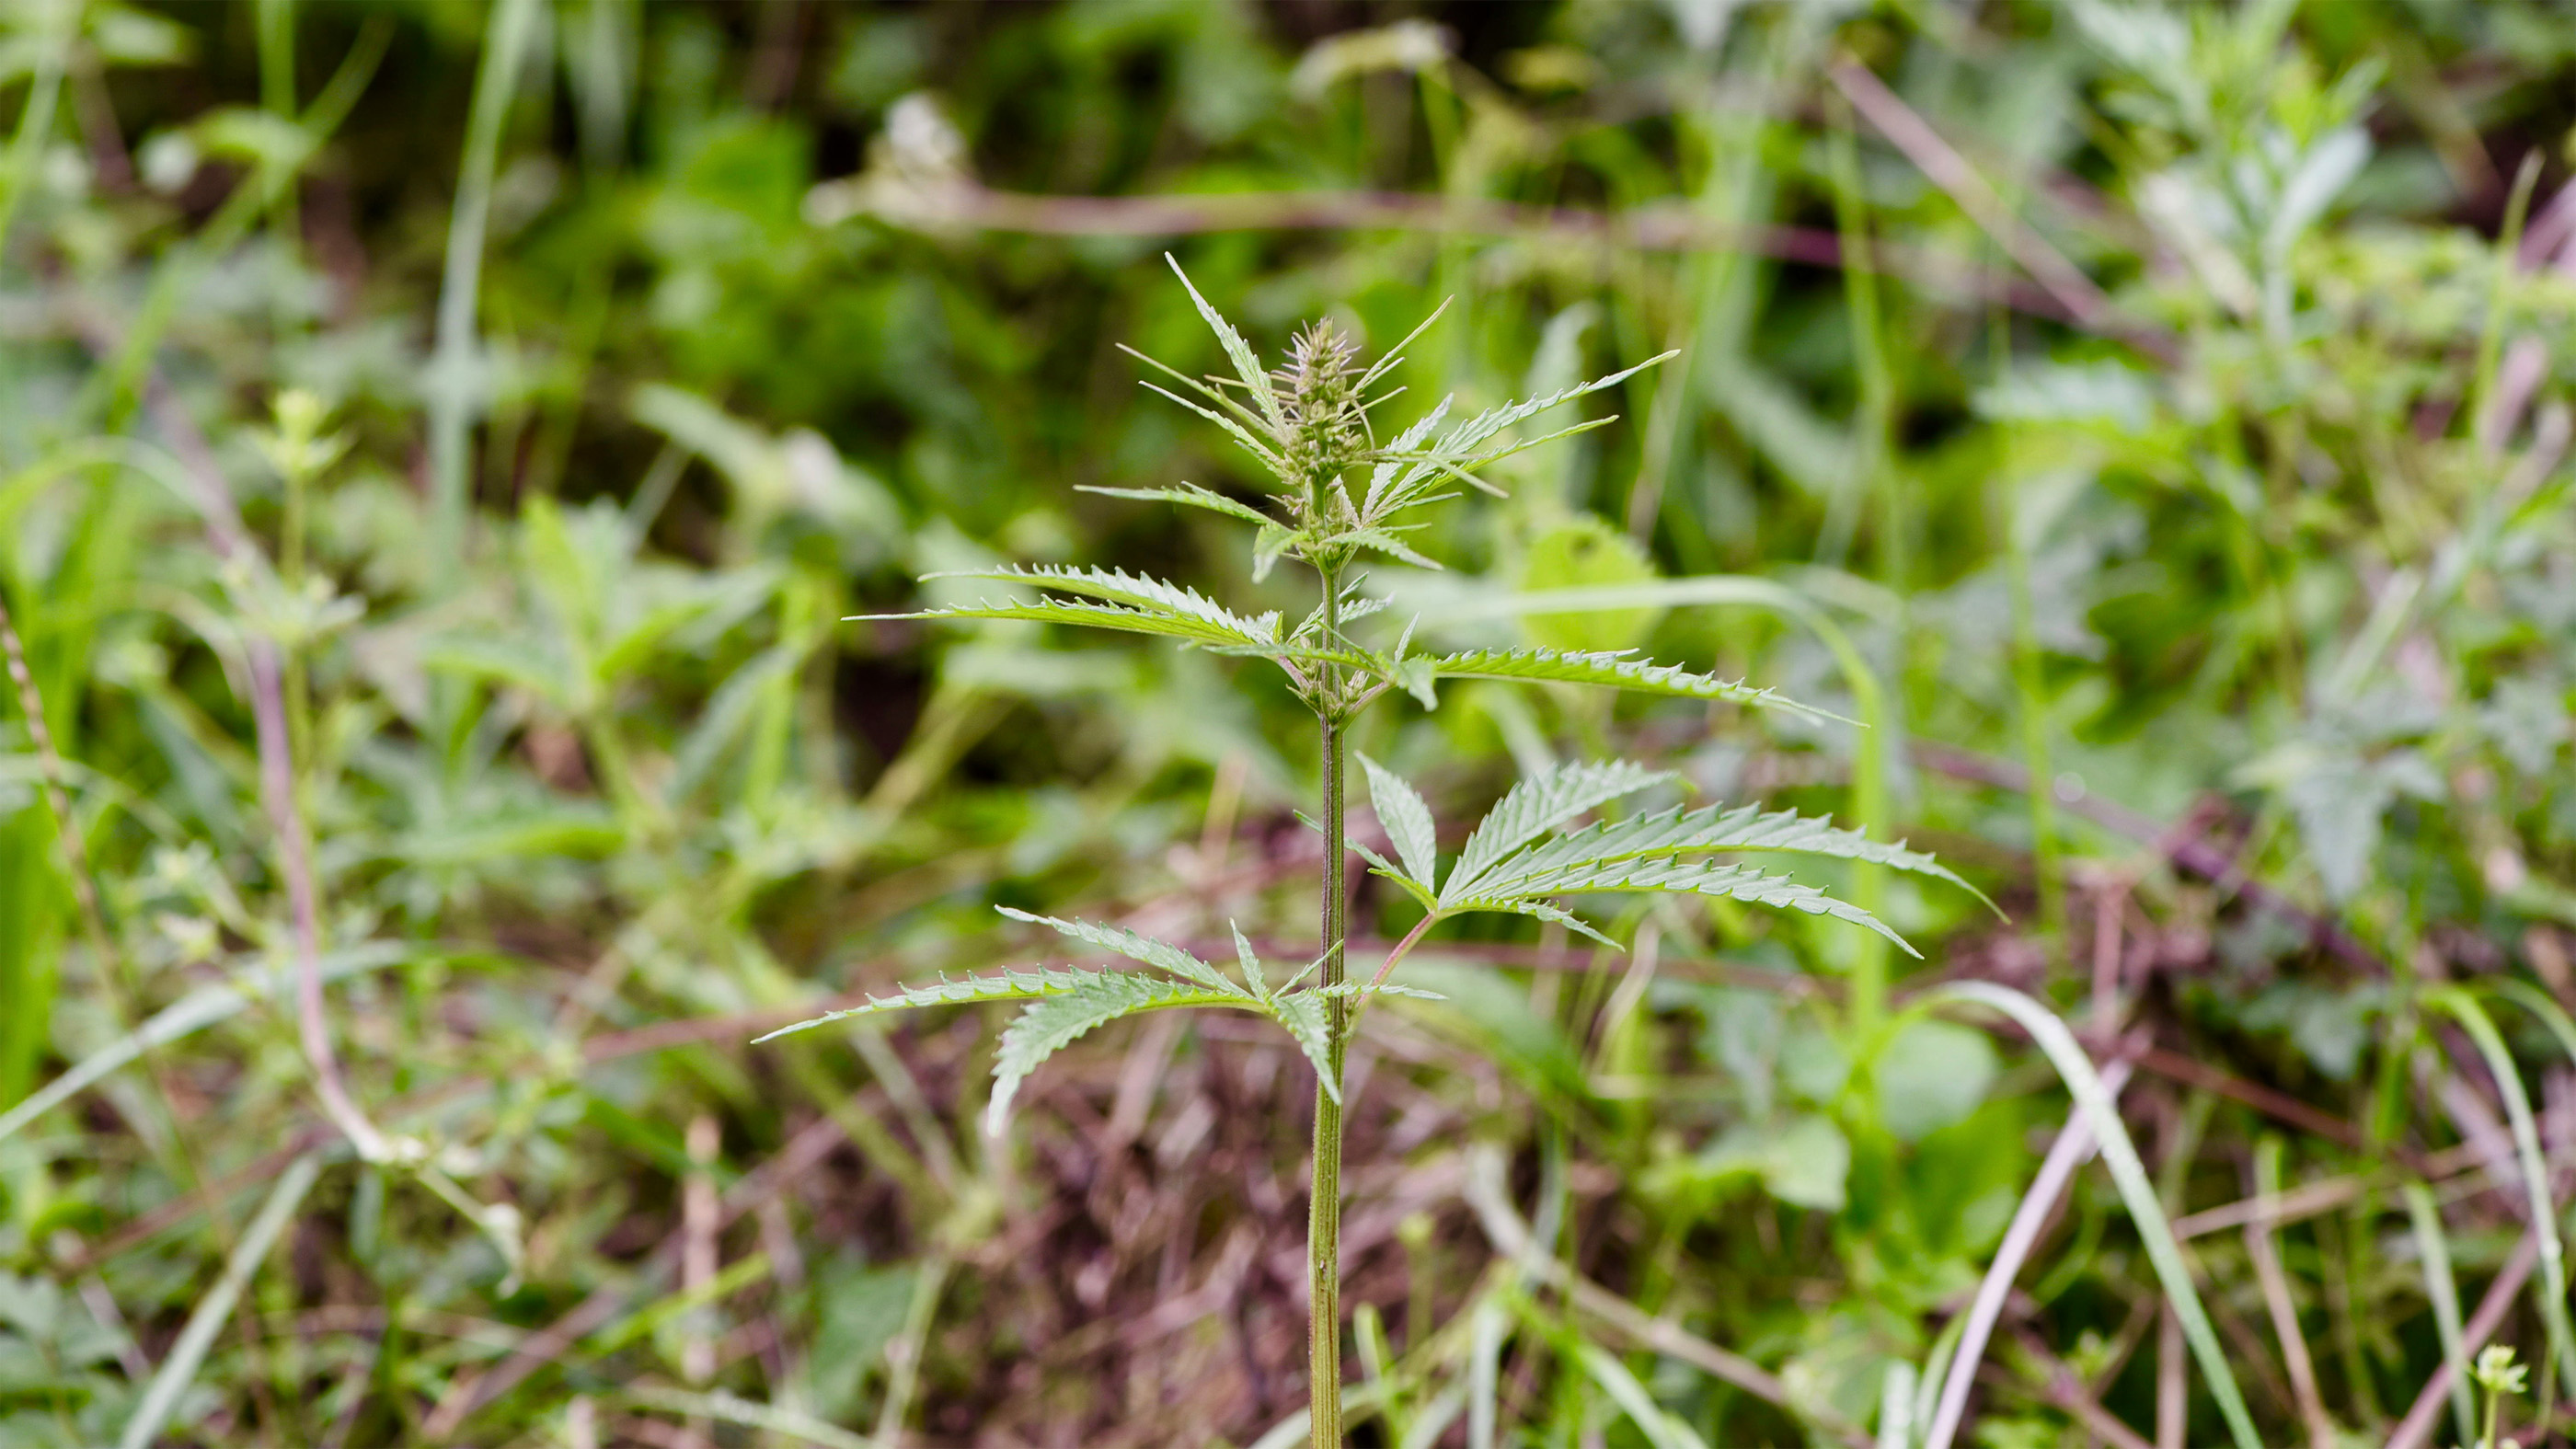 A feral (or wild) cannabis plant in the middle of a grassland in Qinghai province, central China.